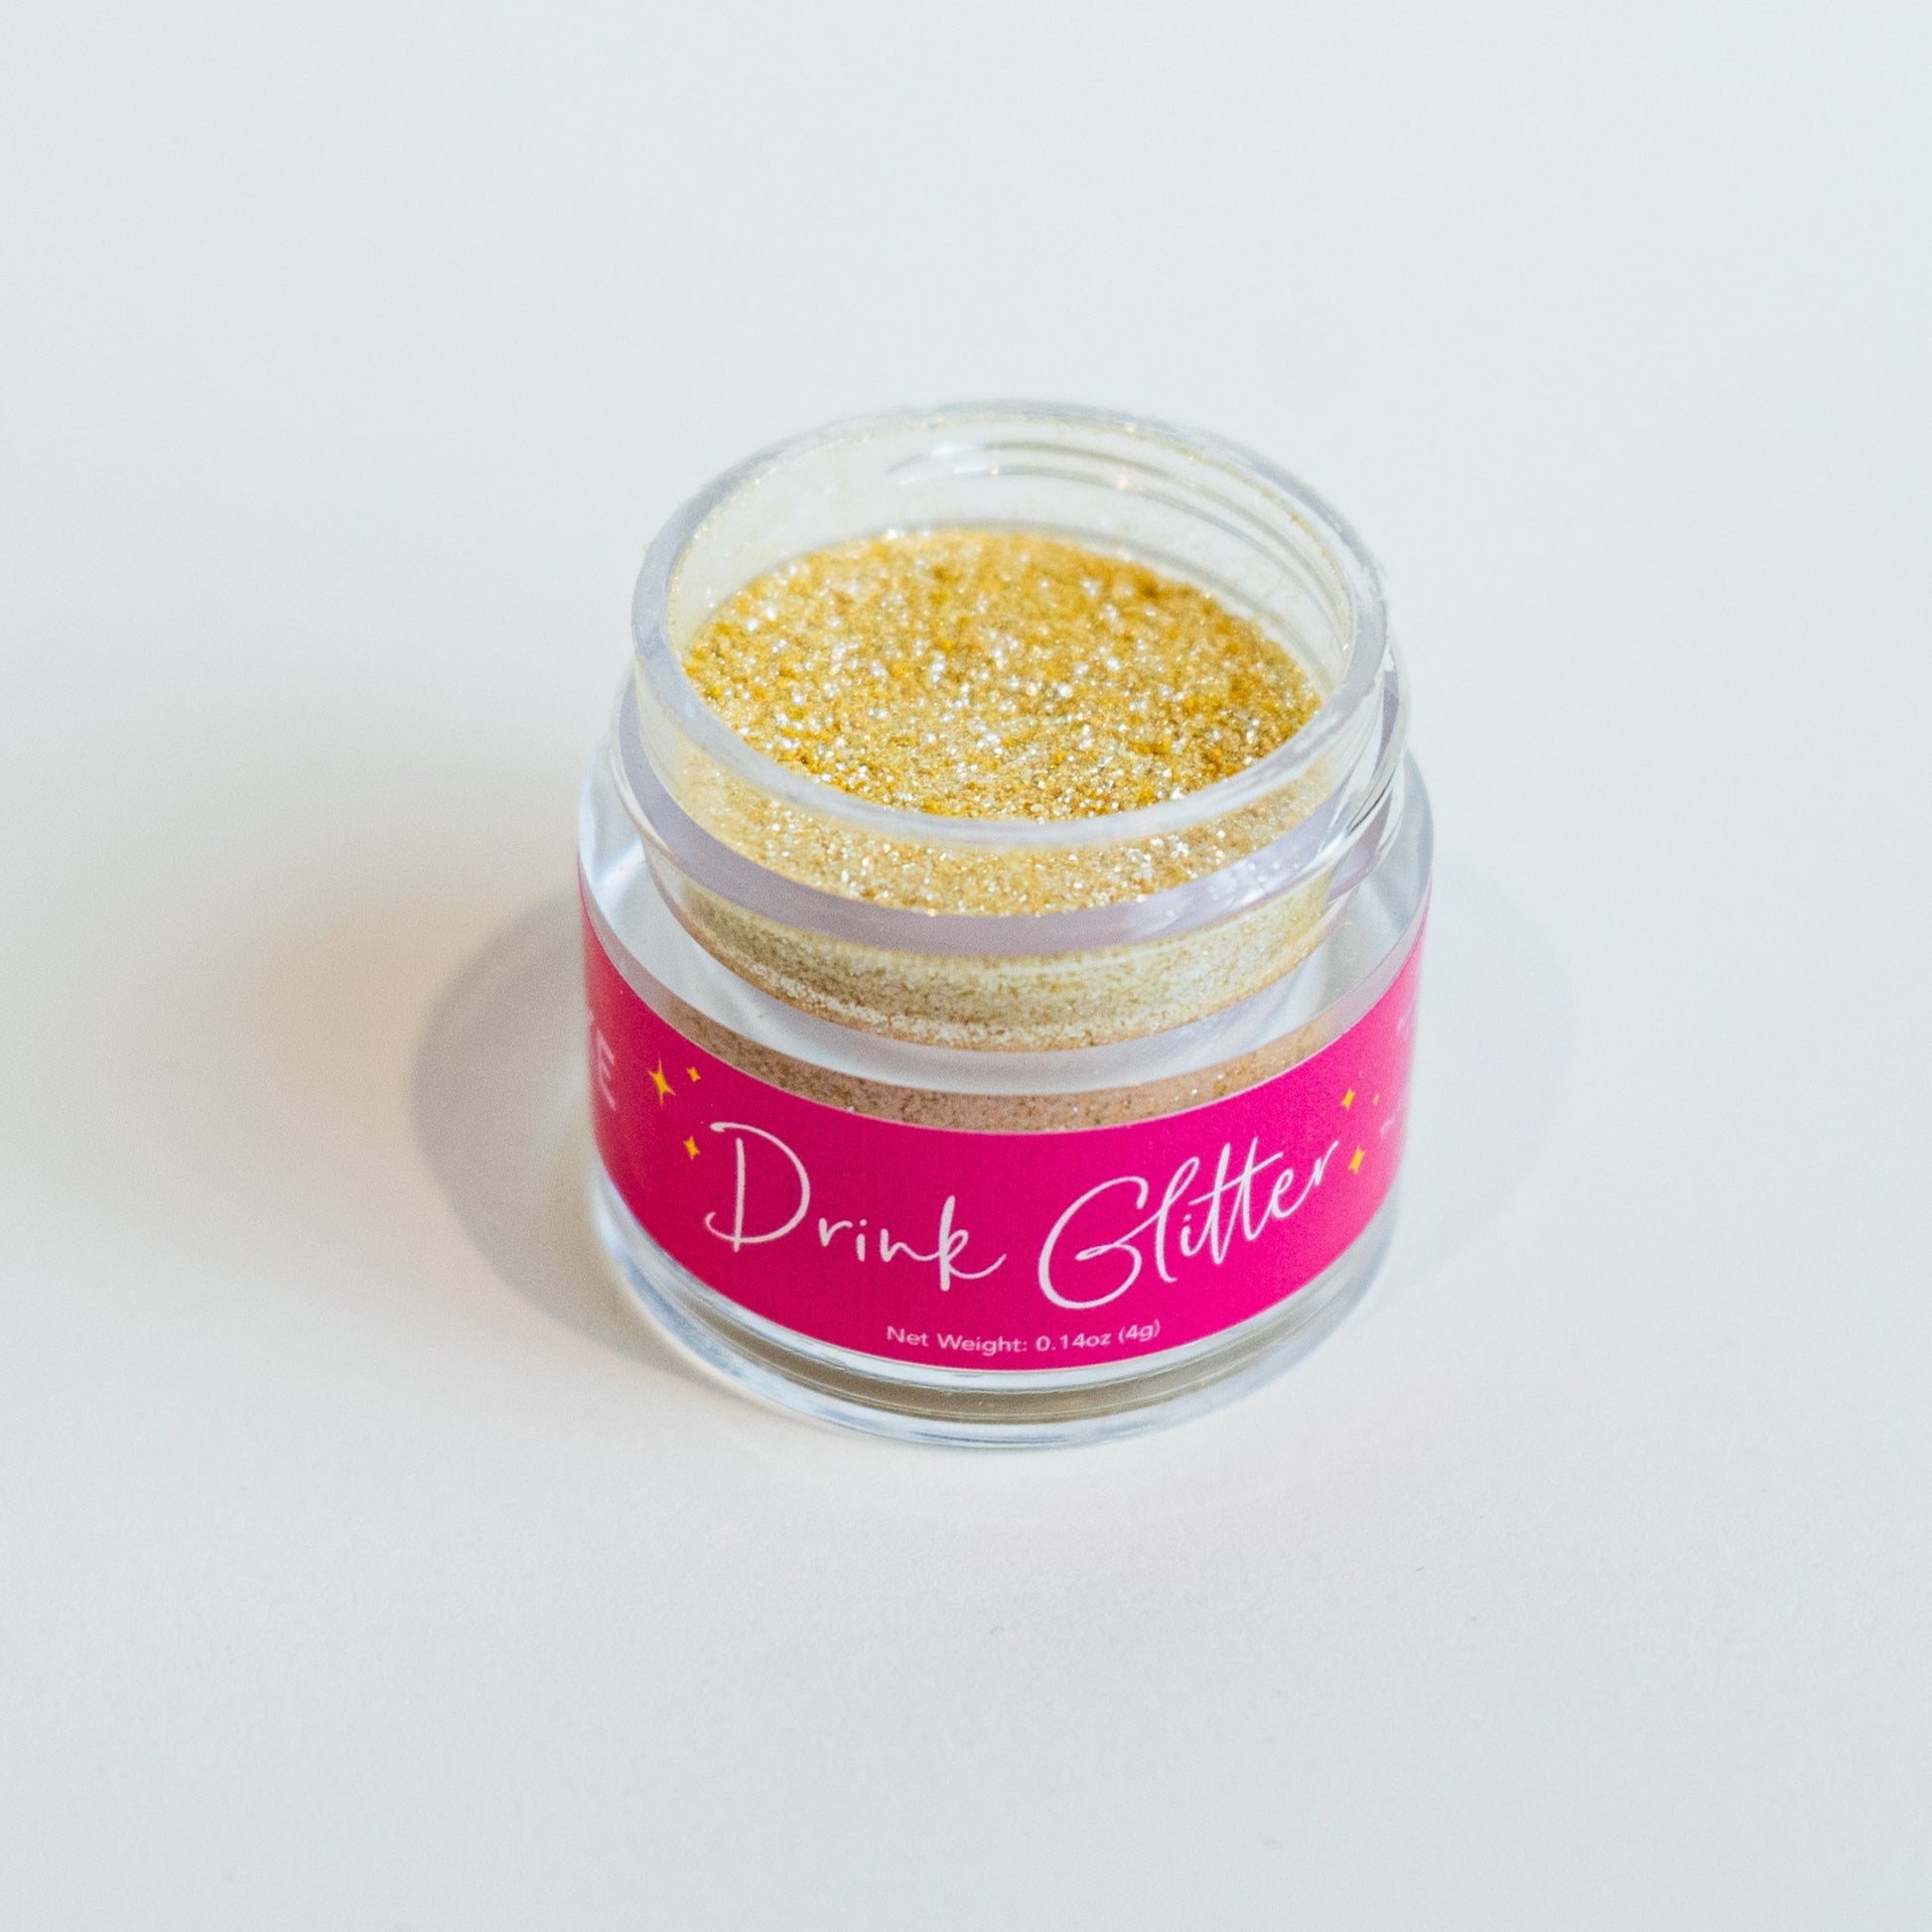 Gold Drink Glitter 4g container